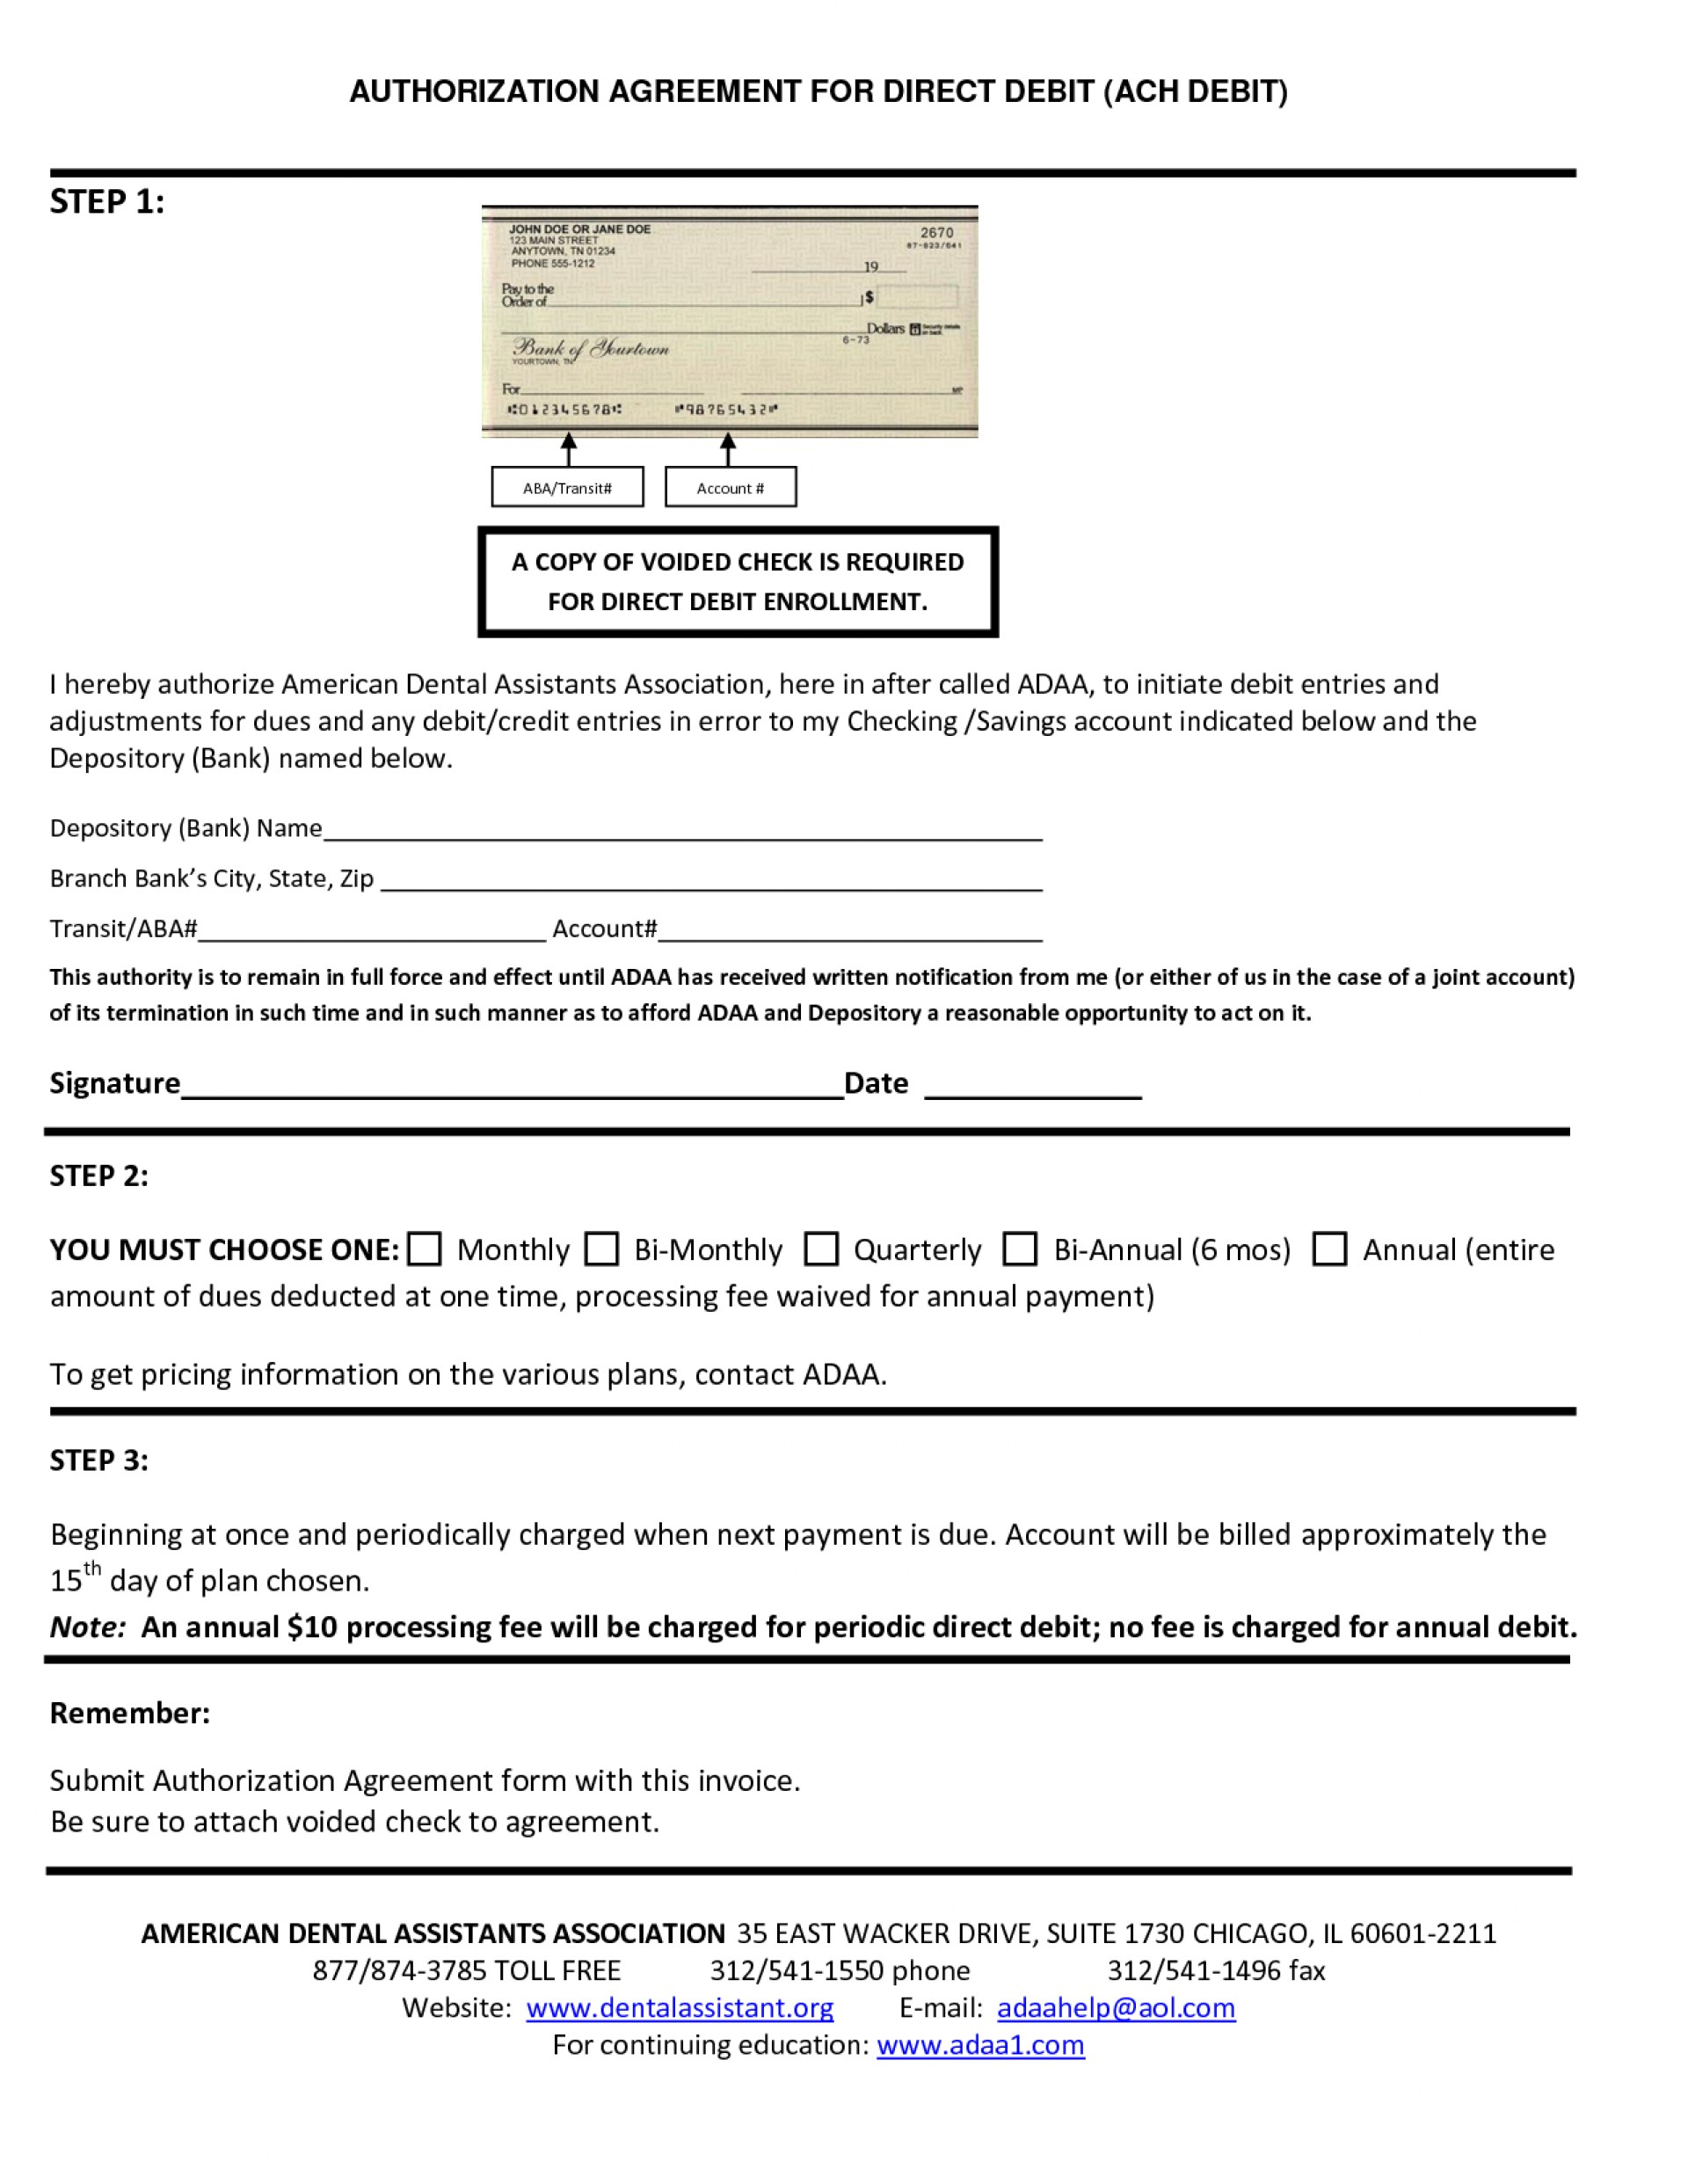 Outstanding Payment Plan Agreement Form Template Templates ~ Fanmailus pertaining to Direct Debit Agreement Template